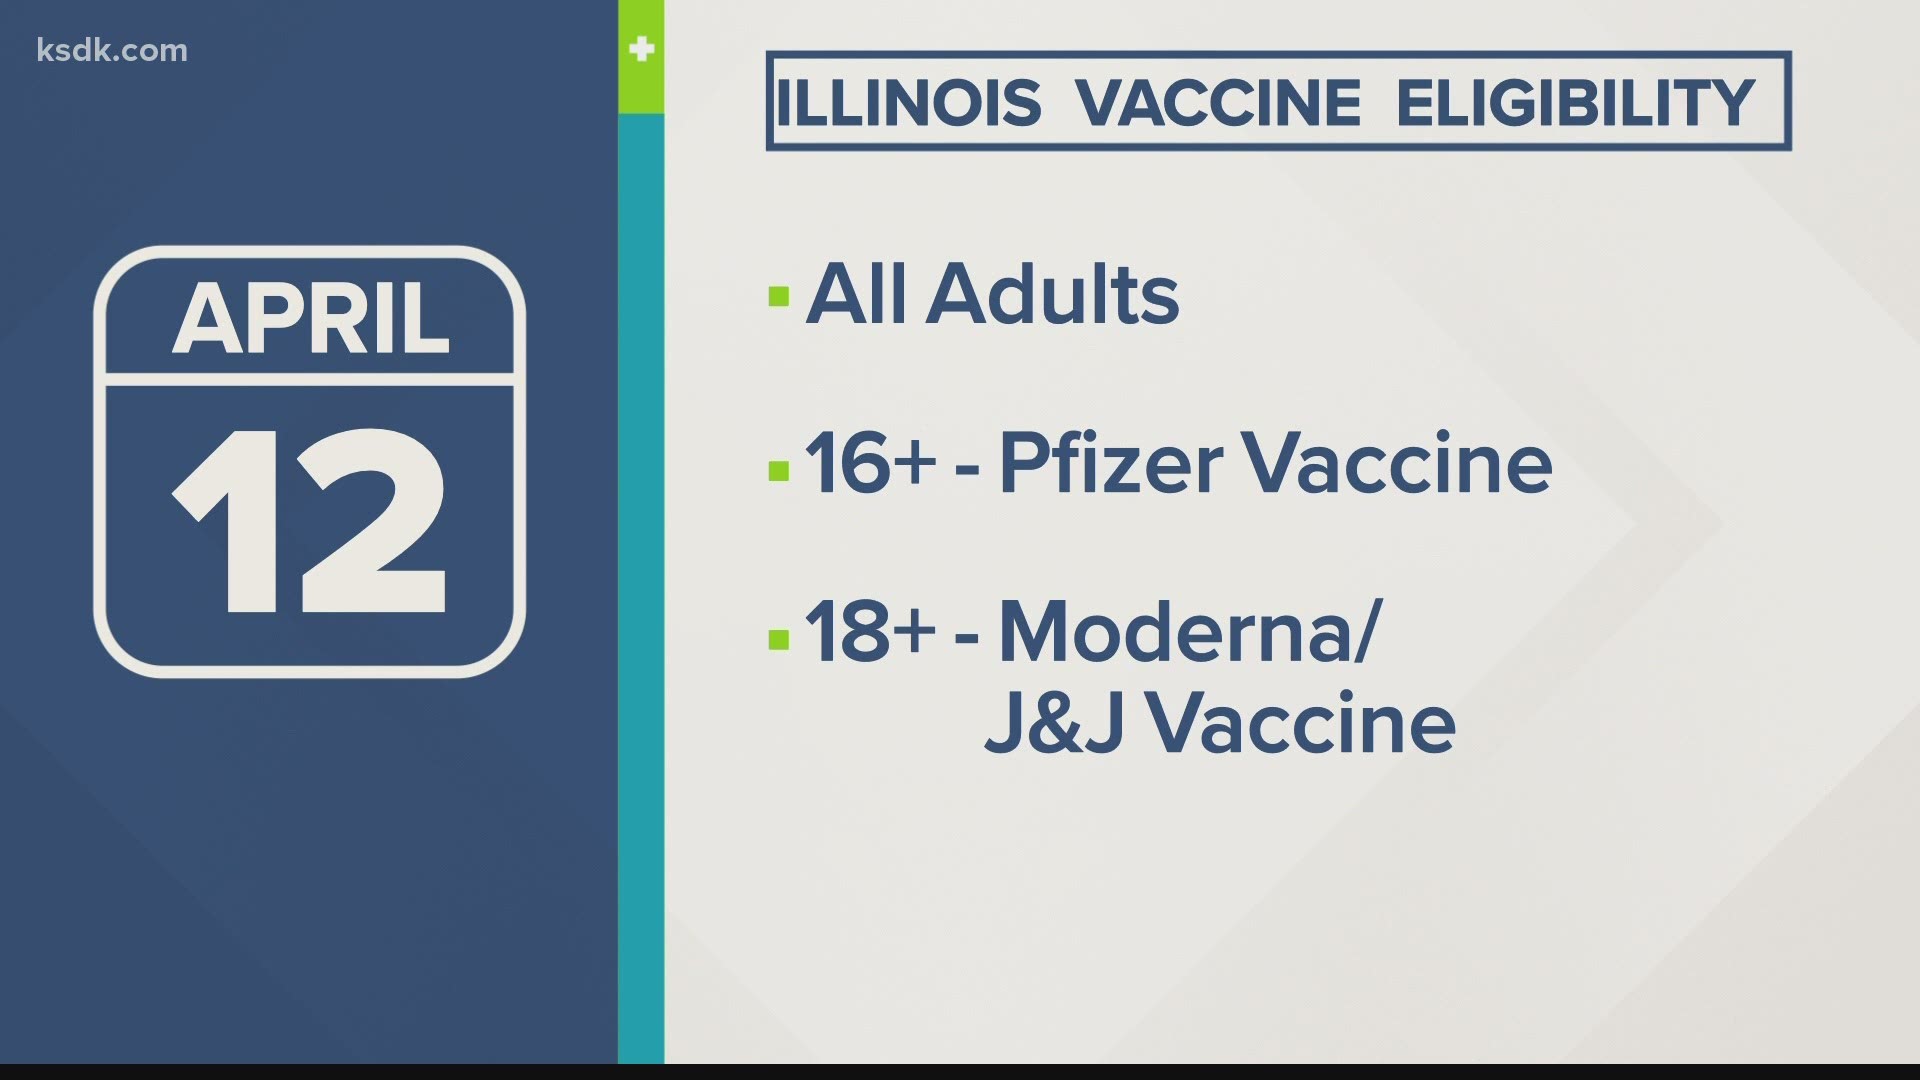 Anyone 16 and older in Illinois can now get a Pfizer vaccine, while anyone 18 and older can get a Moderna or Johnson & Johnson vaccine.